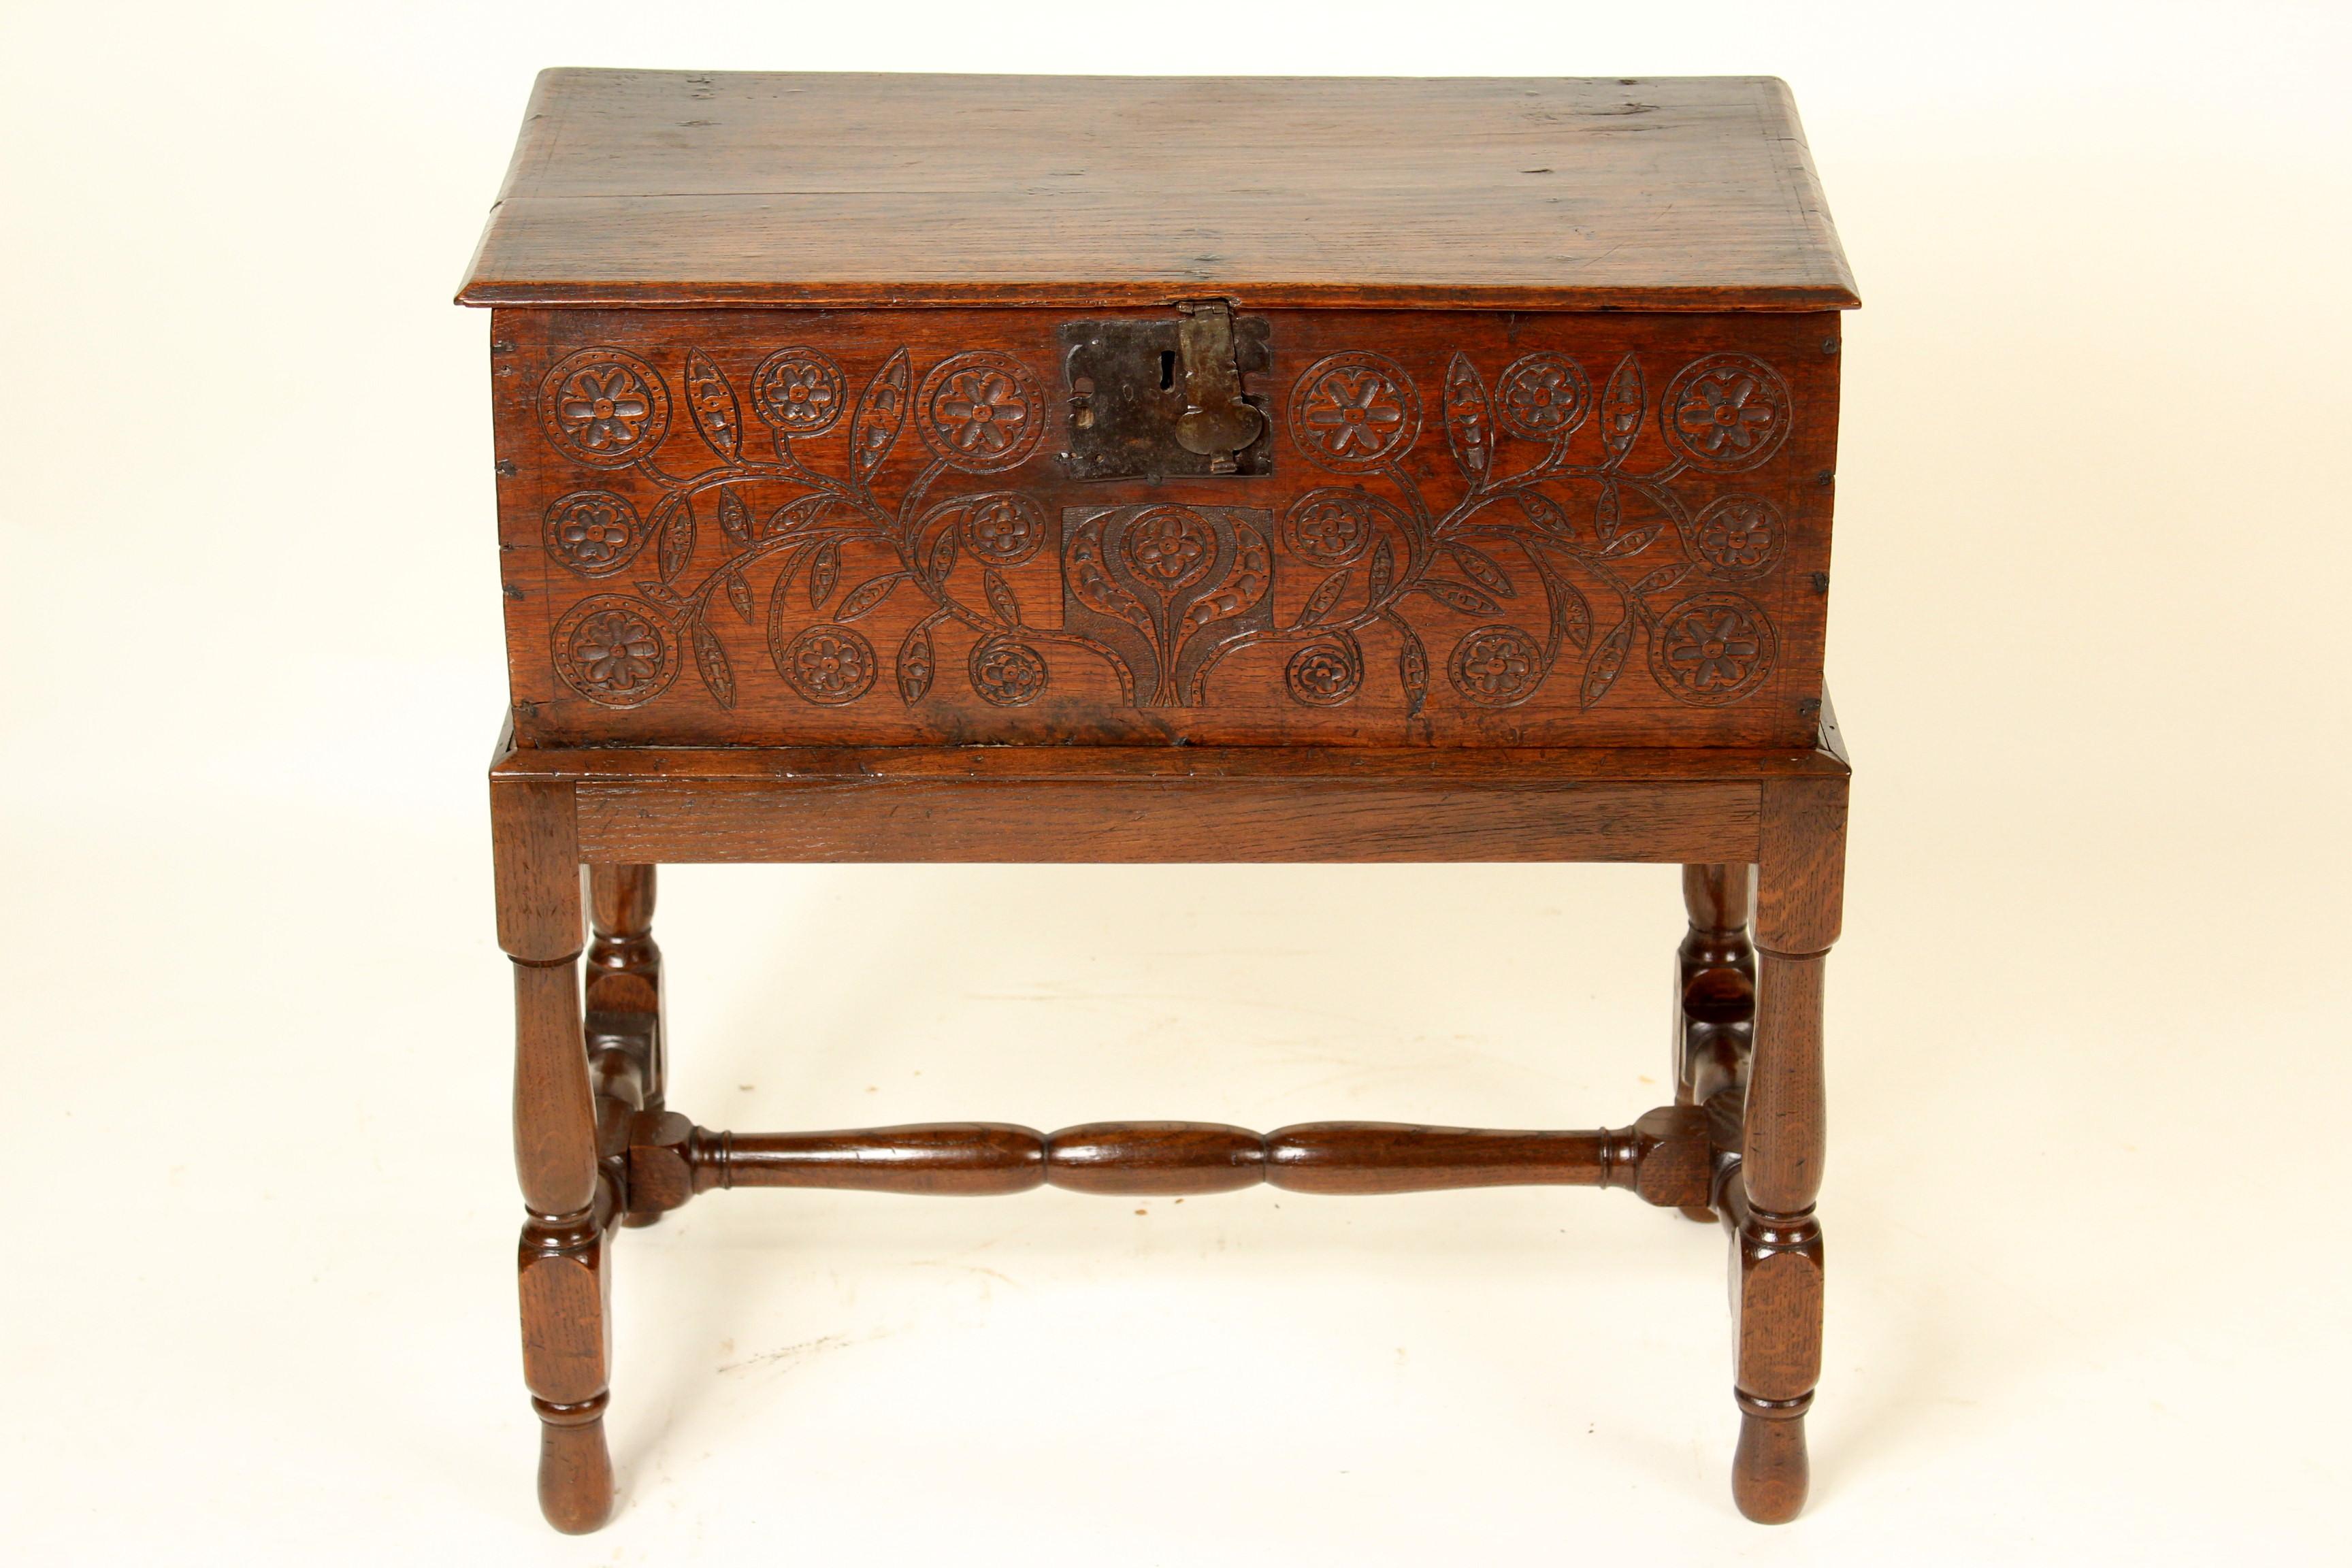 English oak bible box with iron hinges, 19th century resting on a 20th century base. The front carved with flowing vines and Tudor roses. Nice old color. No key.